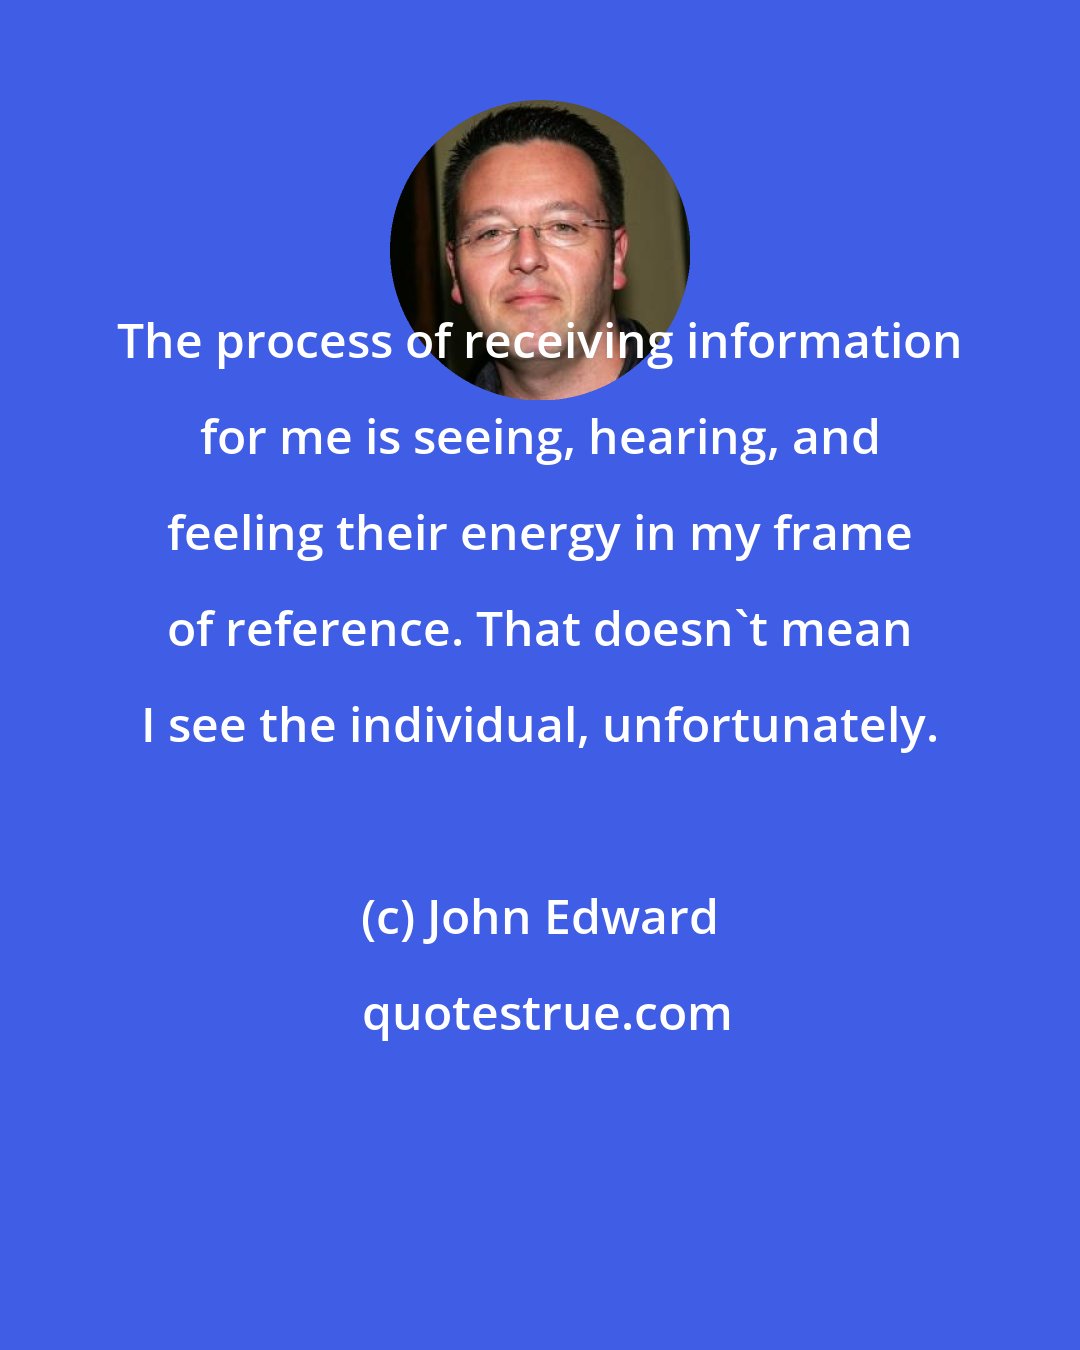 John Edward: The process of receiving information for me is seeing, hearing, and feeling their energy in my frame of reference. That doesn't mean I see the individual, unfortunately.